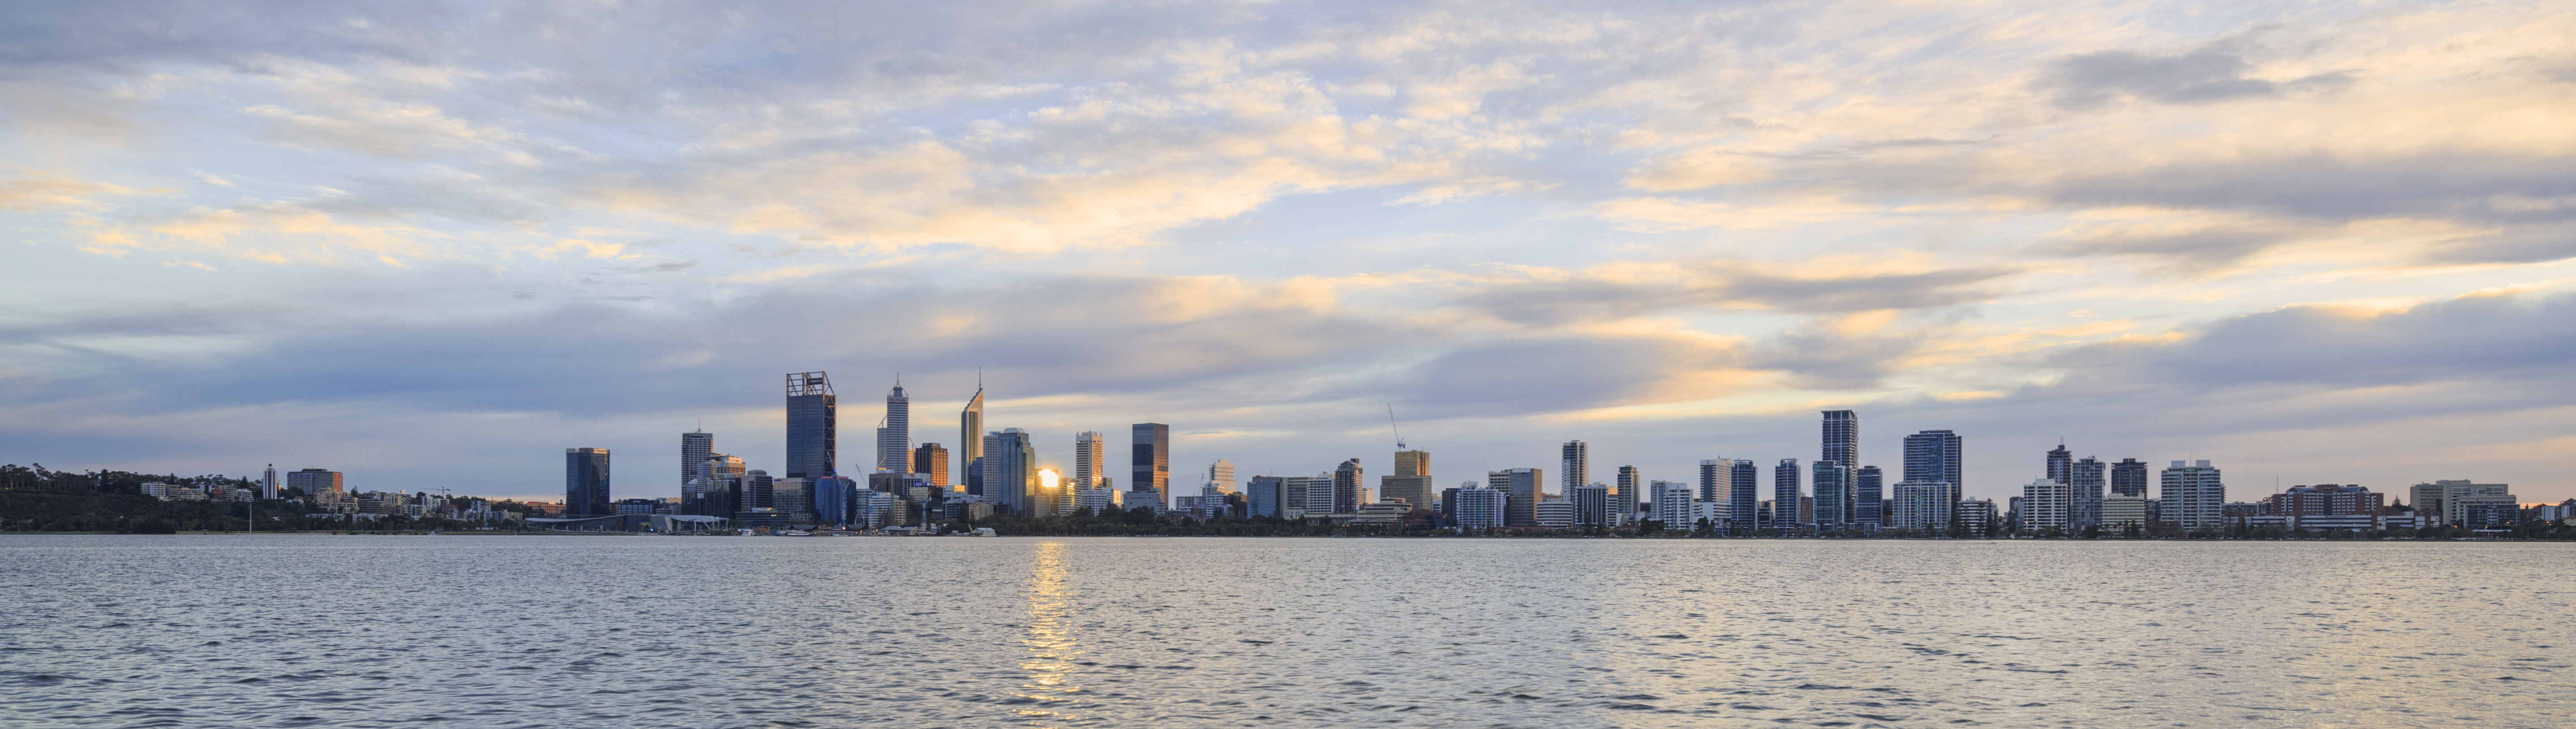 Perth and the Swan River at Sunrise, 11th June 2017